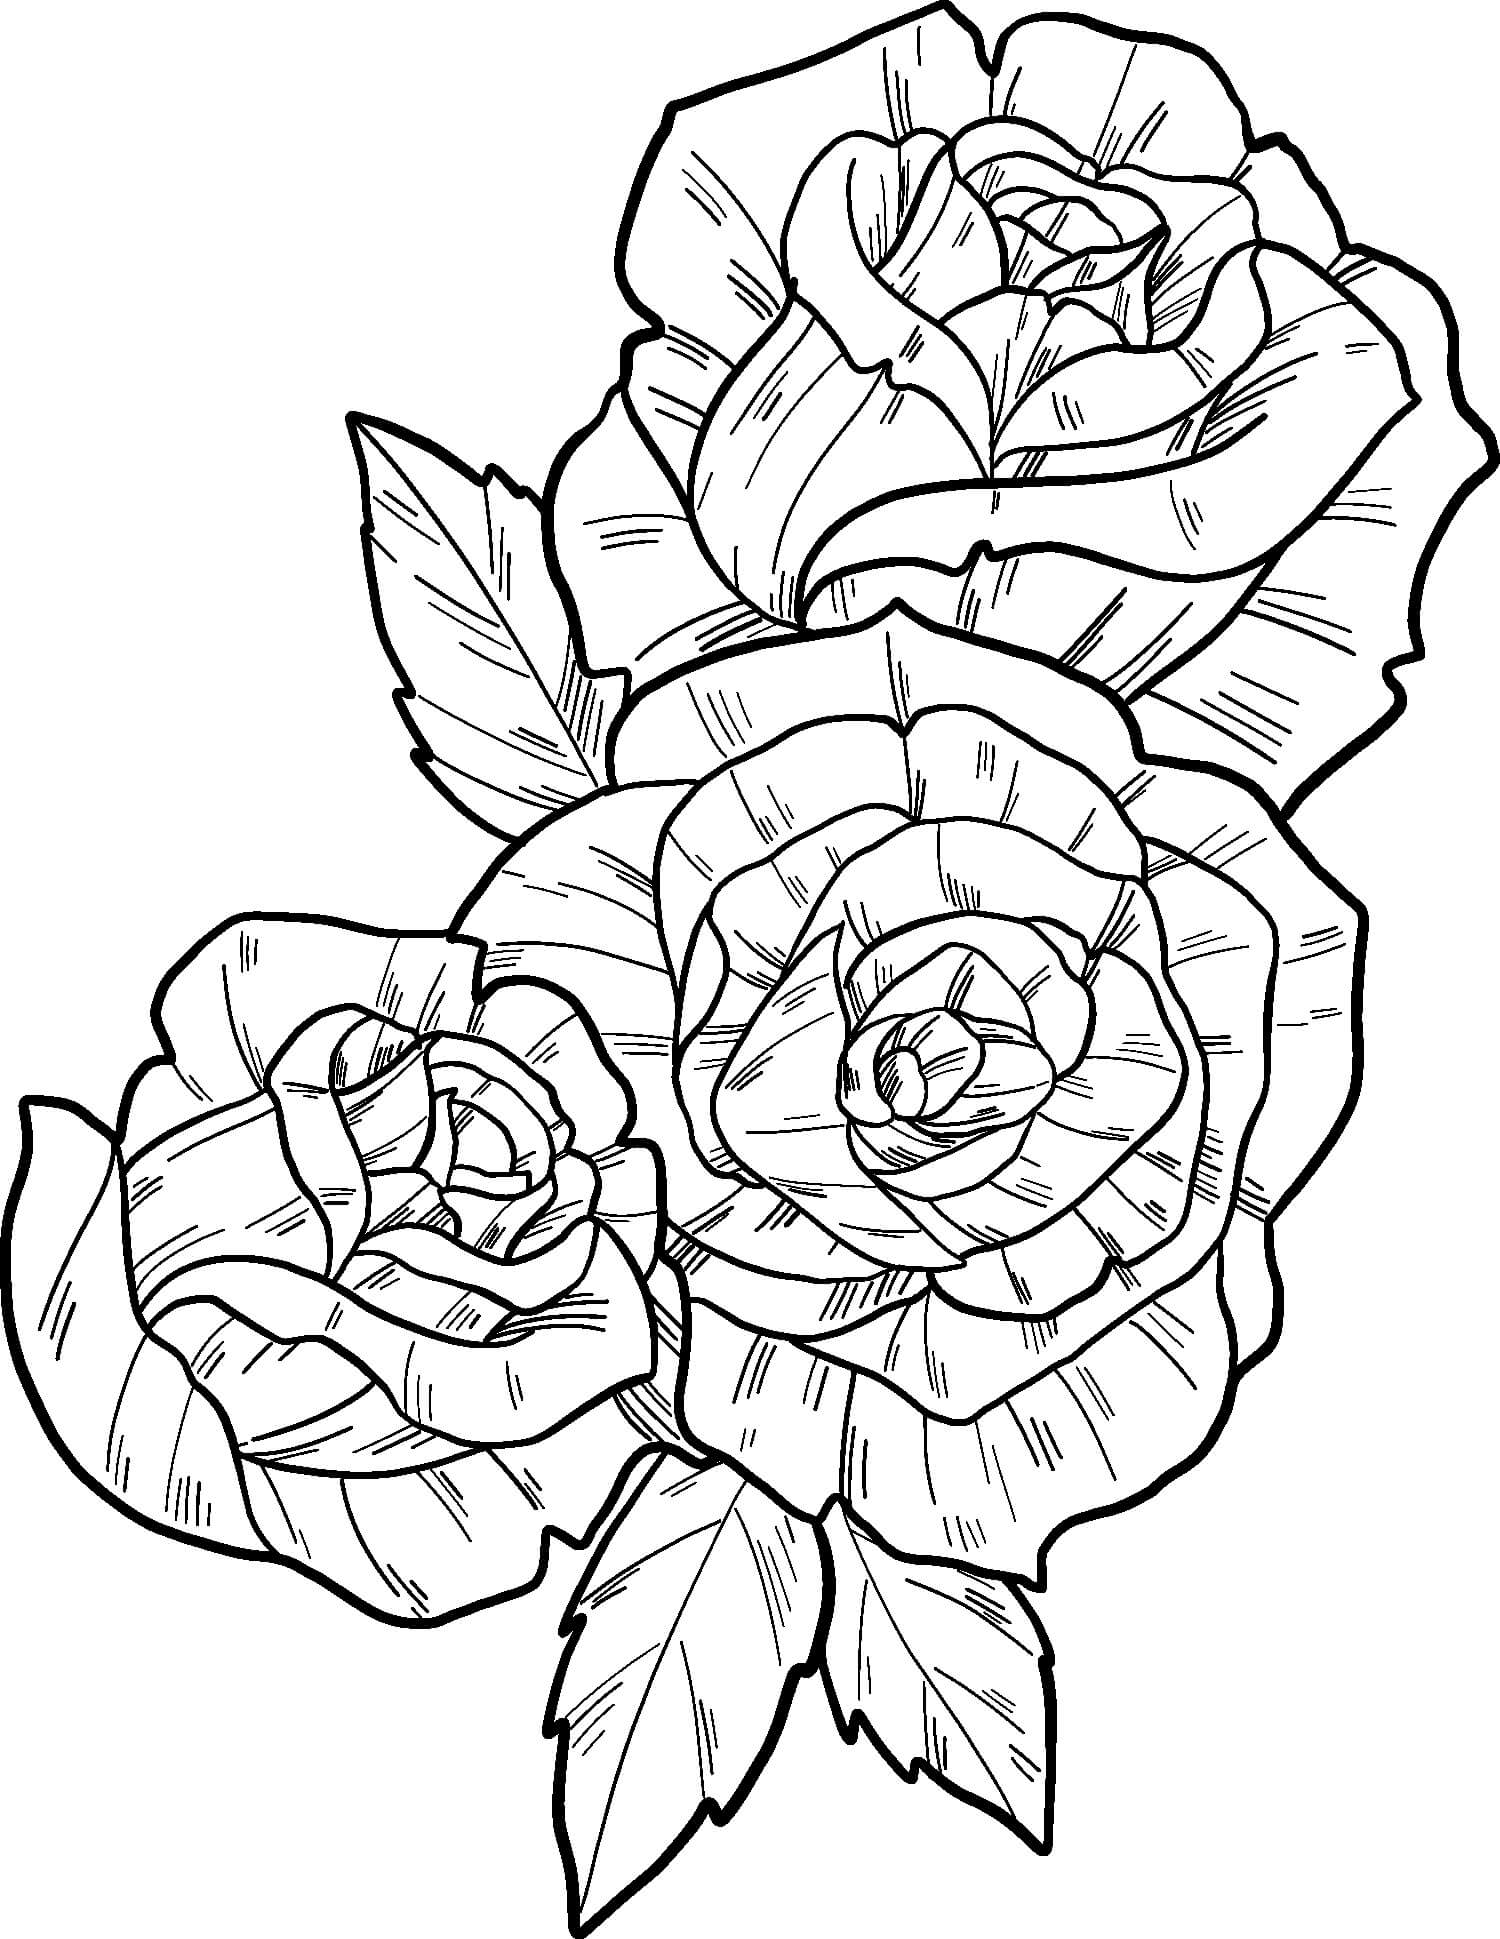 Trois Roses coloring page